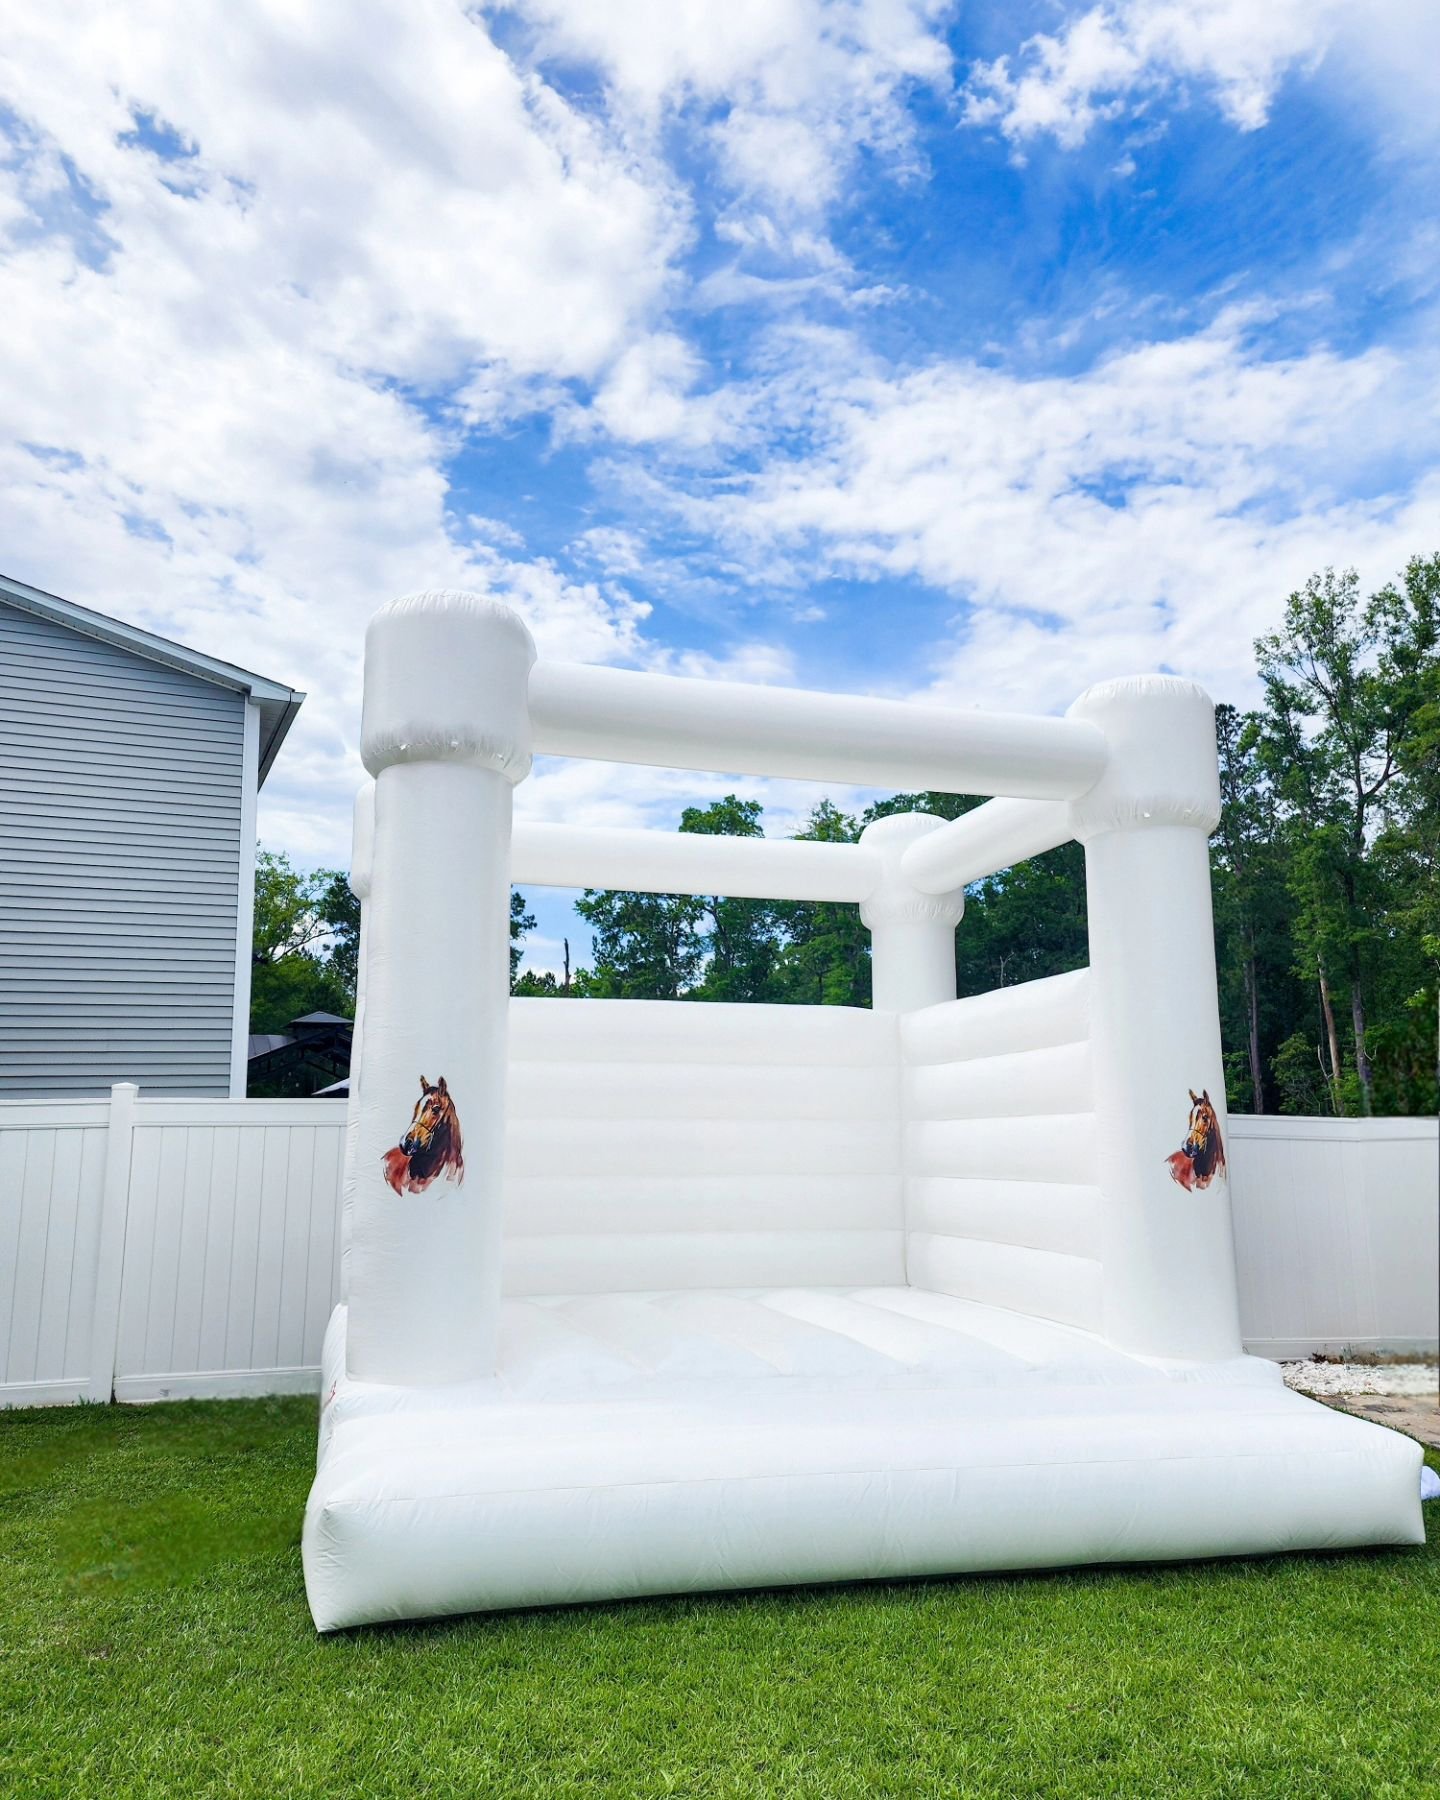 🏇Off to the races with a Kentucky Derby party! Grab a mint julep and savor spring 🌸🌷🌺 Such a colorful setup! Odds are high the littles will have hours of fun! 
.
.
.
🌟CHIC Modern Bounce House &amp; Luxe Soft Playset
🪧 @firehousenutz 
.
.
.
.
CH